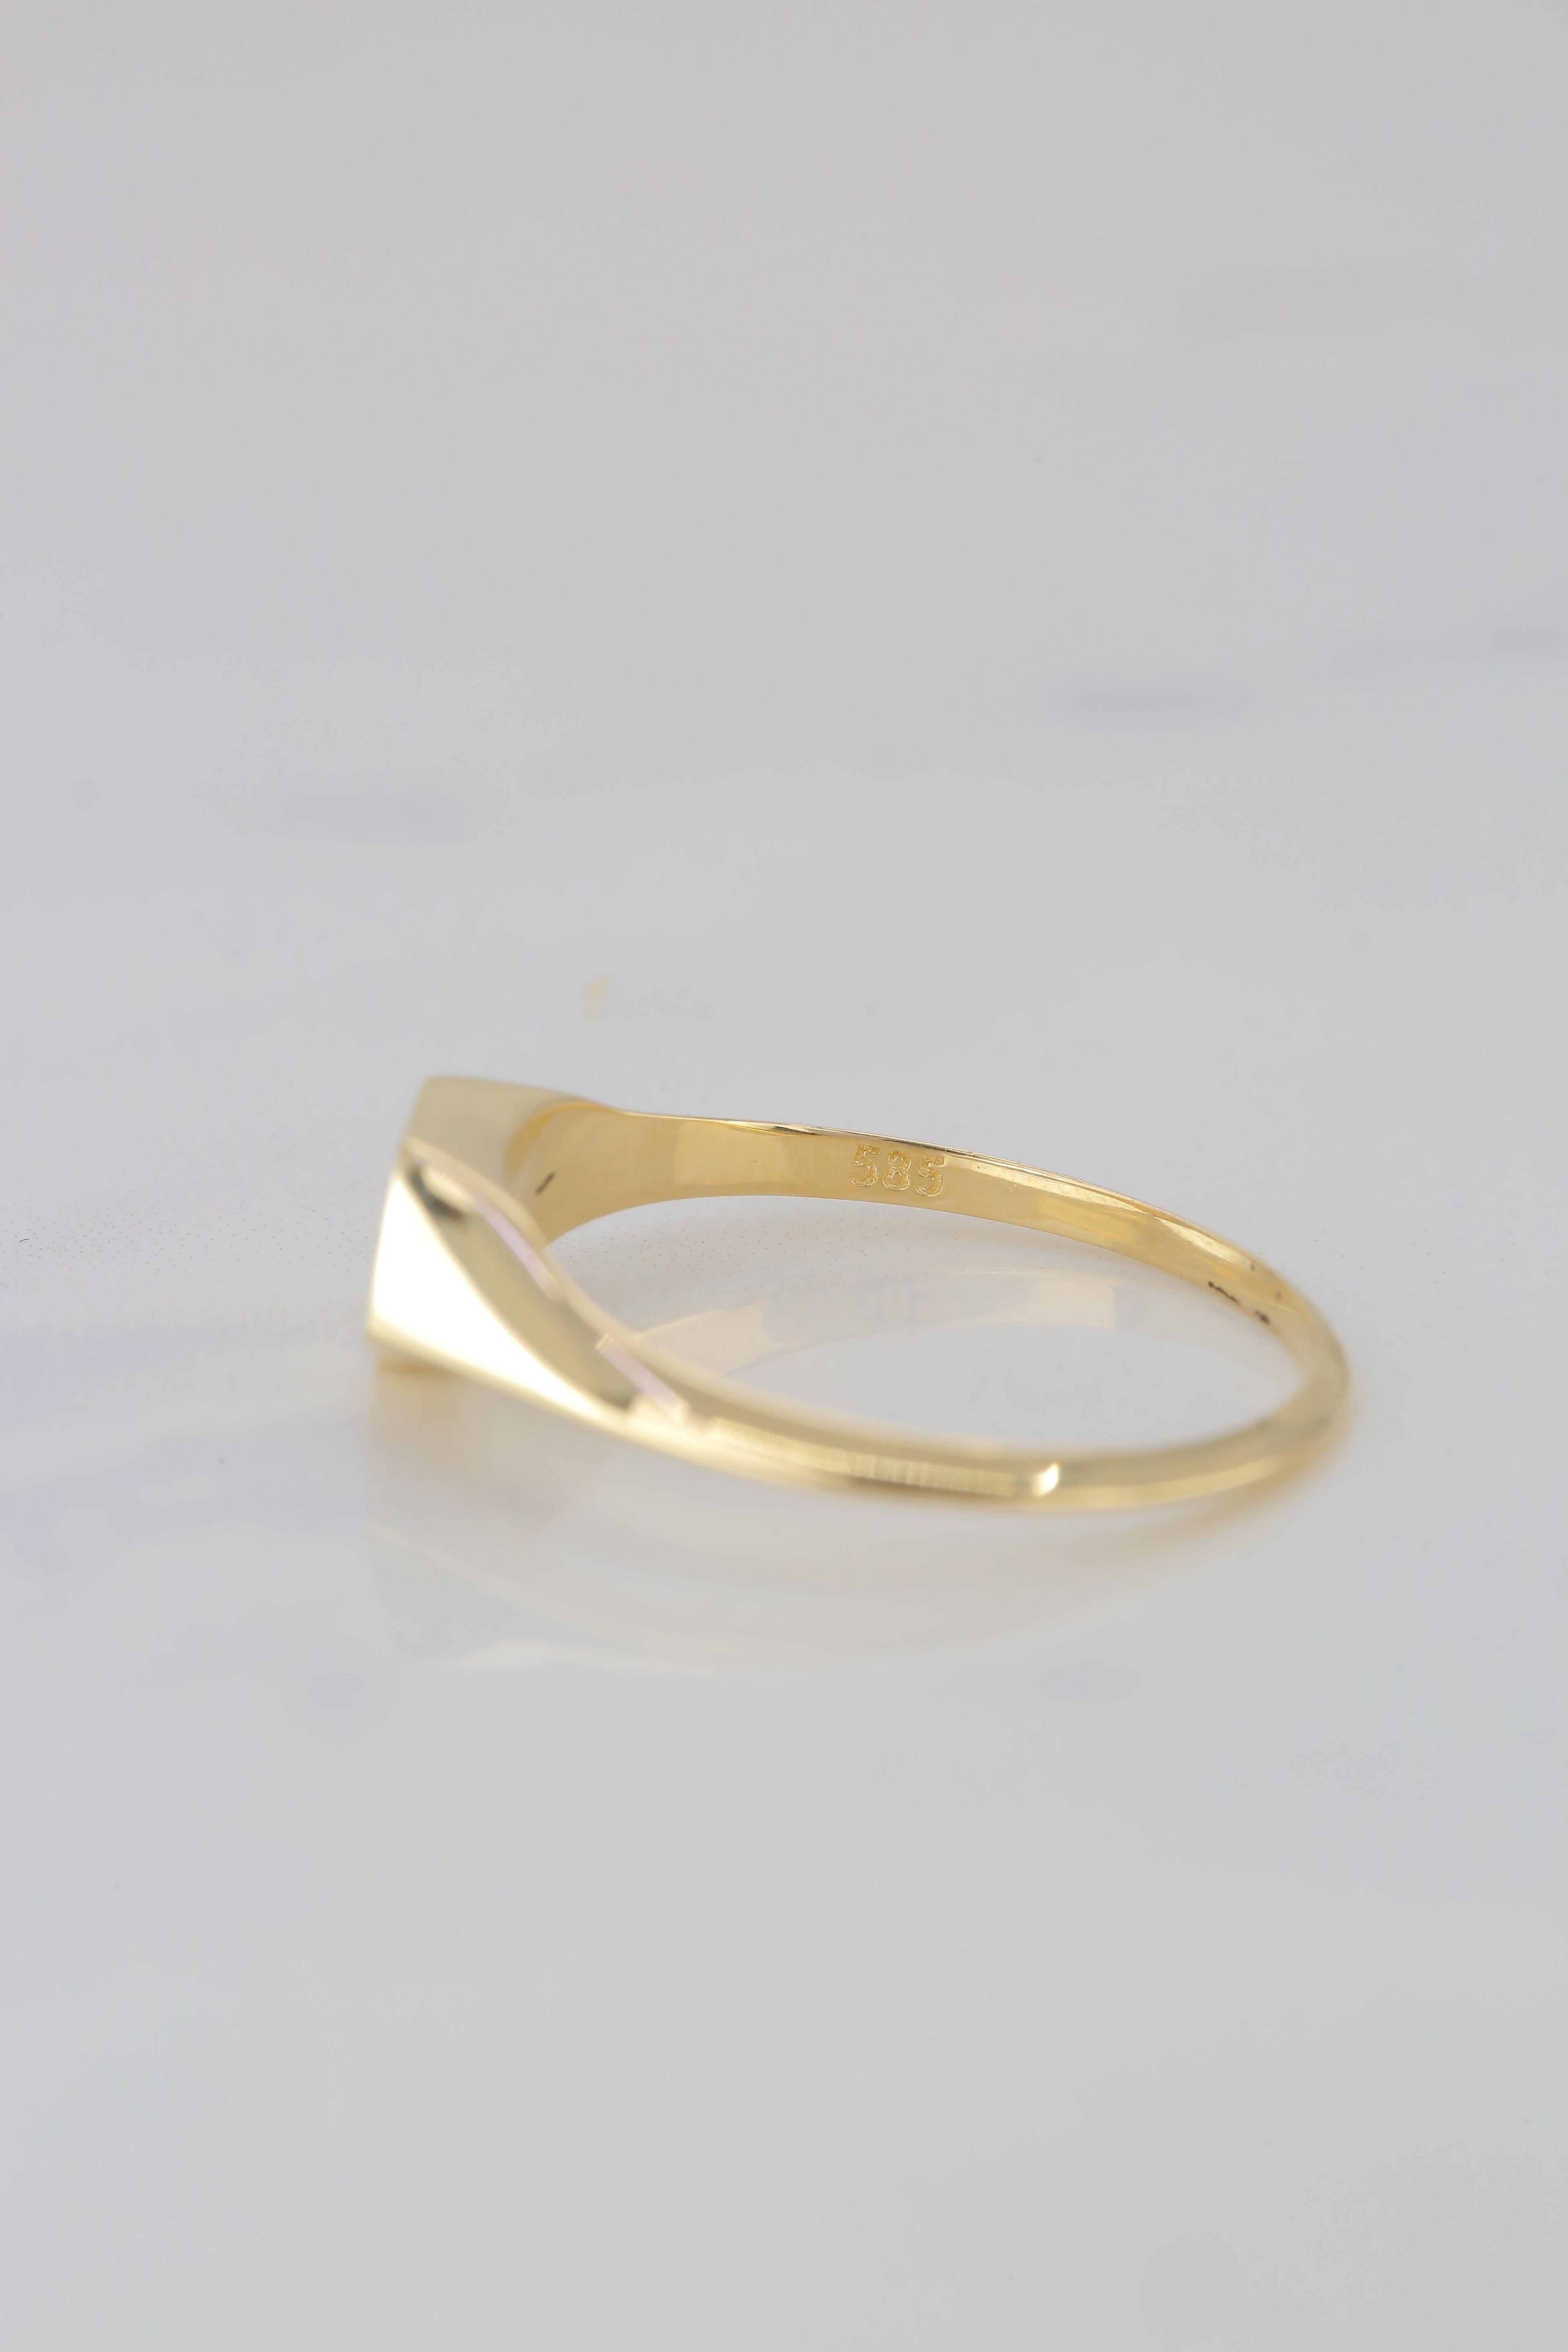 For Sale:  Pinky Signet Ring, 14K Gold Pinky Pentagon Signet Ring, Small Pentagonal Ring 7